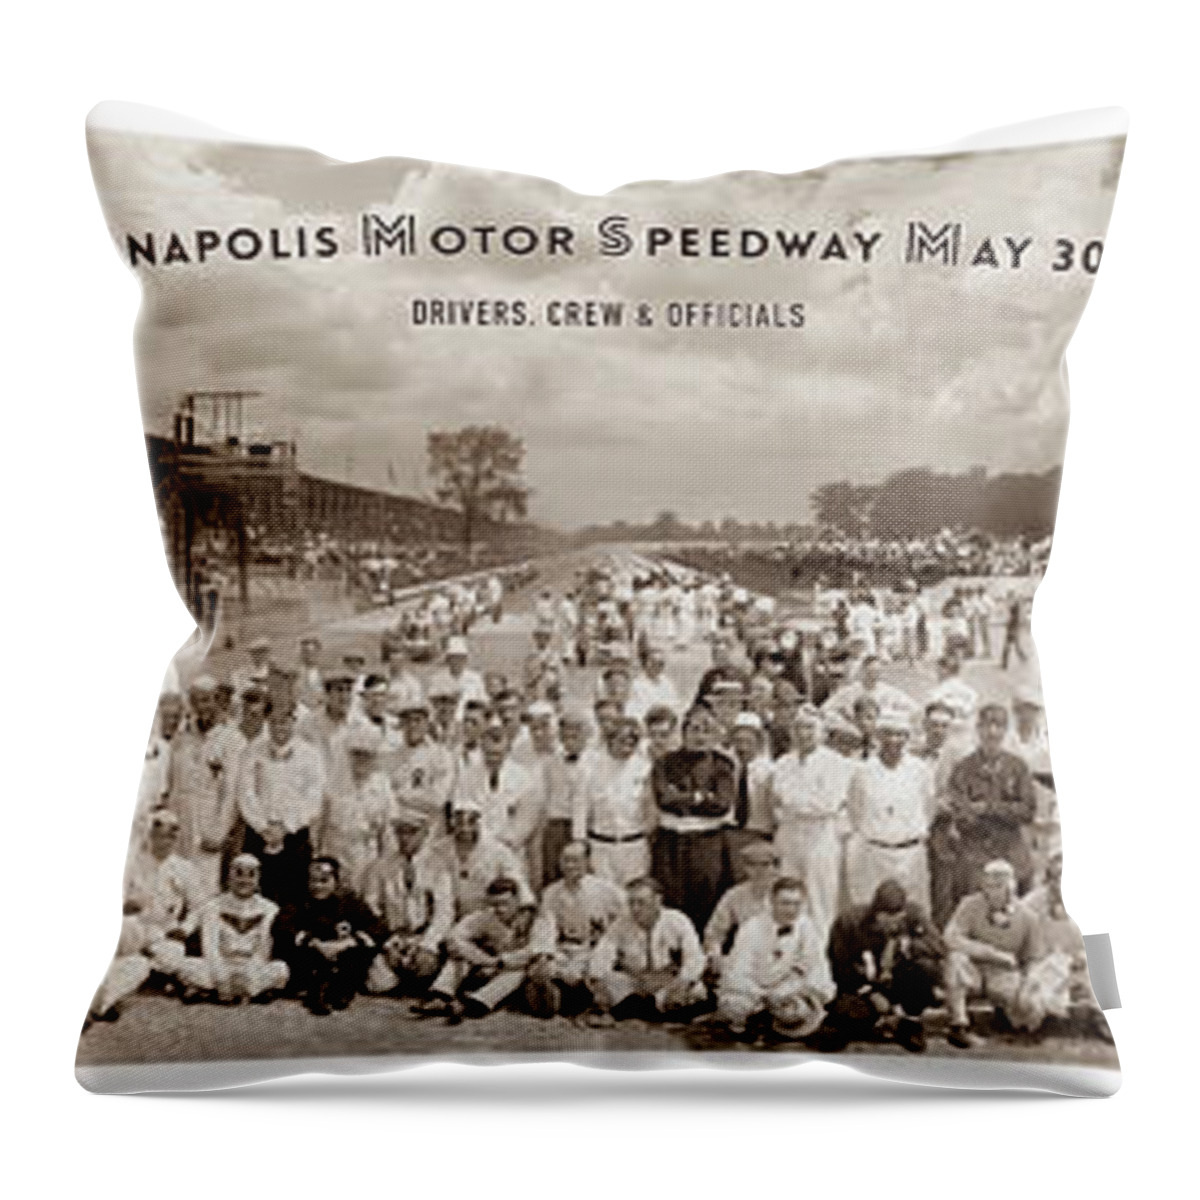 Indy 500 Throw Pillow featuring the photograph 1929 Indy 500 Drivers, Crew and Officials by Retrographs